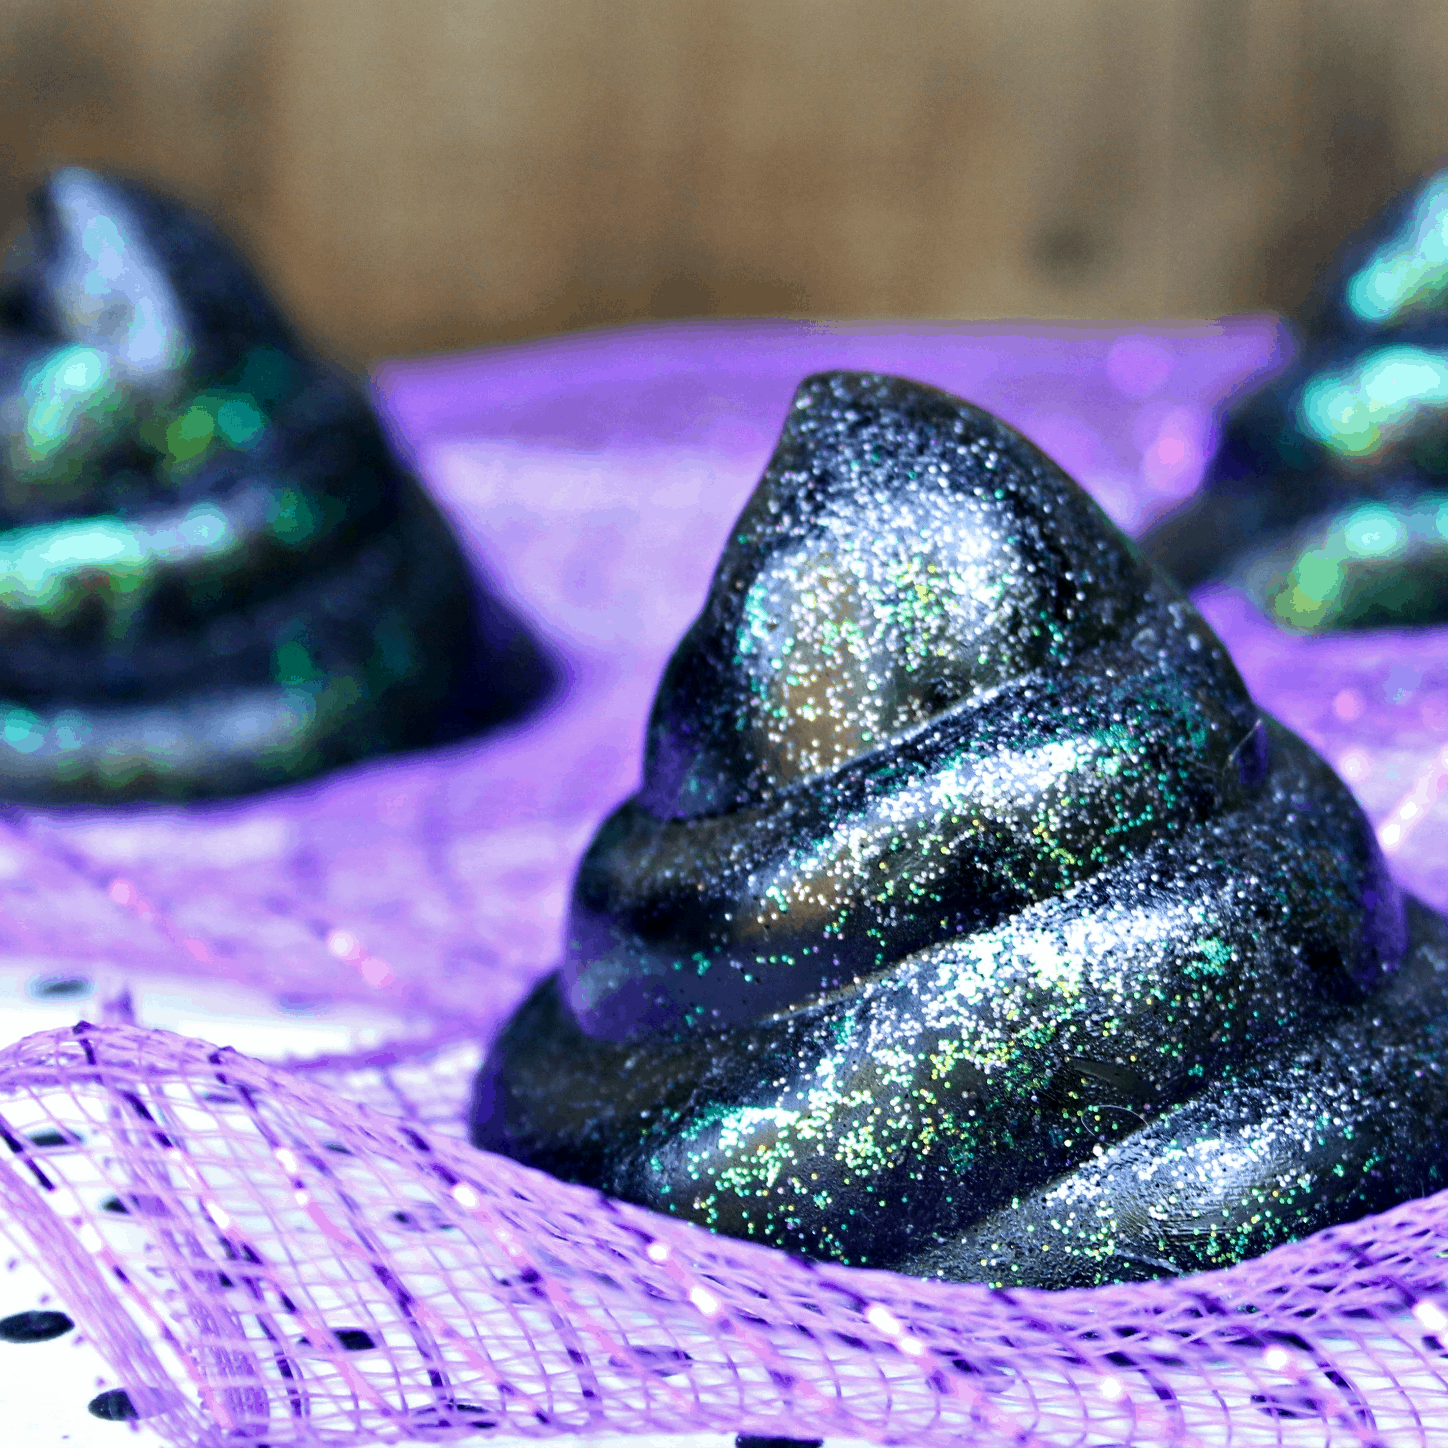 black and glitter soap in the shape of a poop on a purple cloth